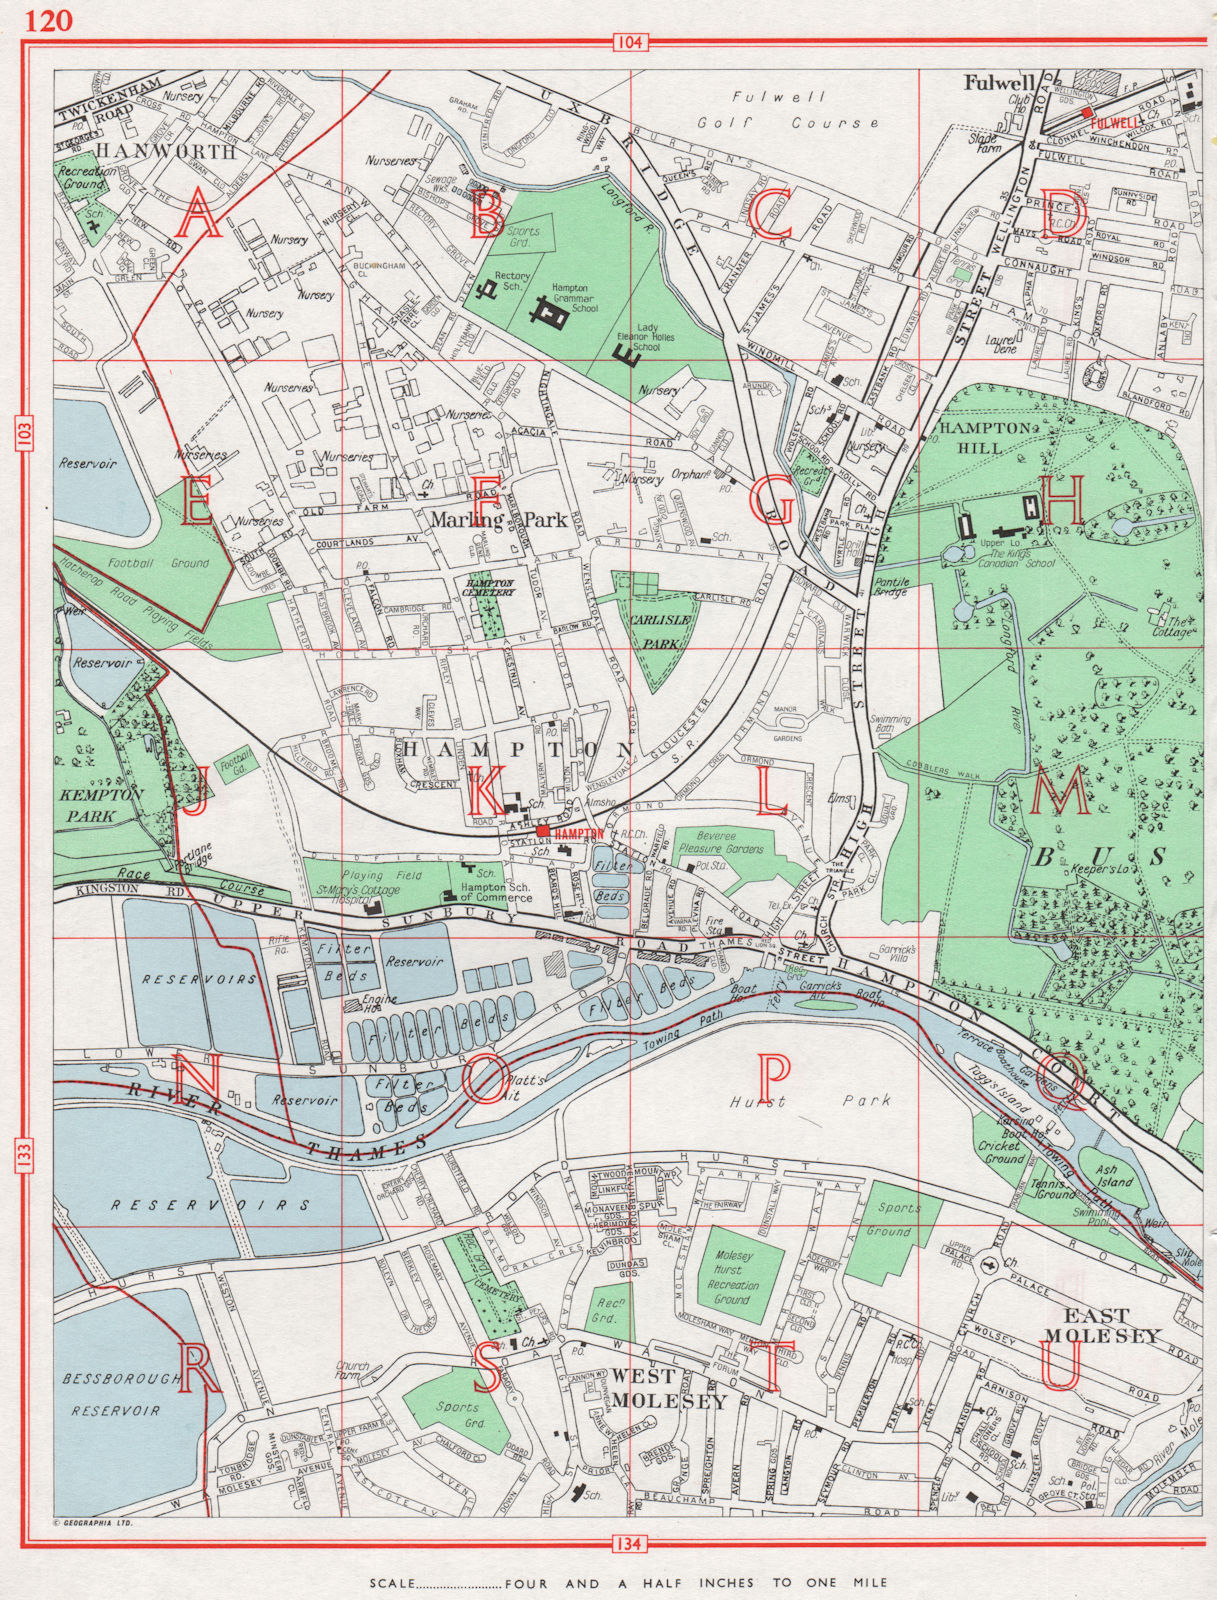 HAMPTON. Fulwell Hanworth West Molesey East Molesey Bushy Park 1964 old map